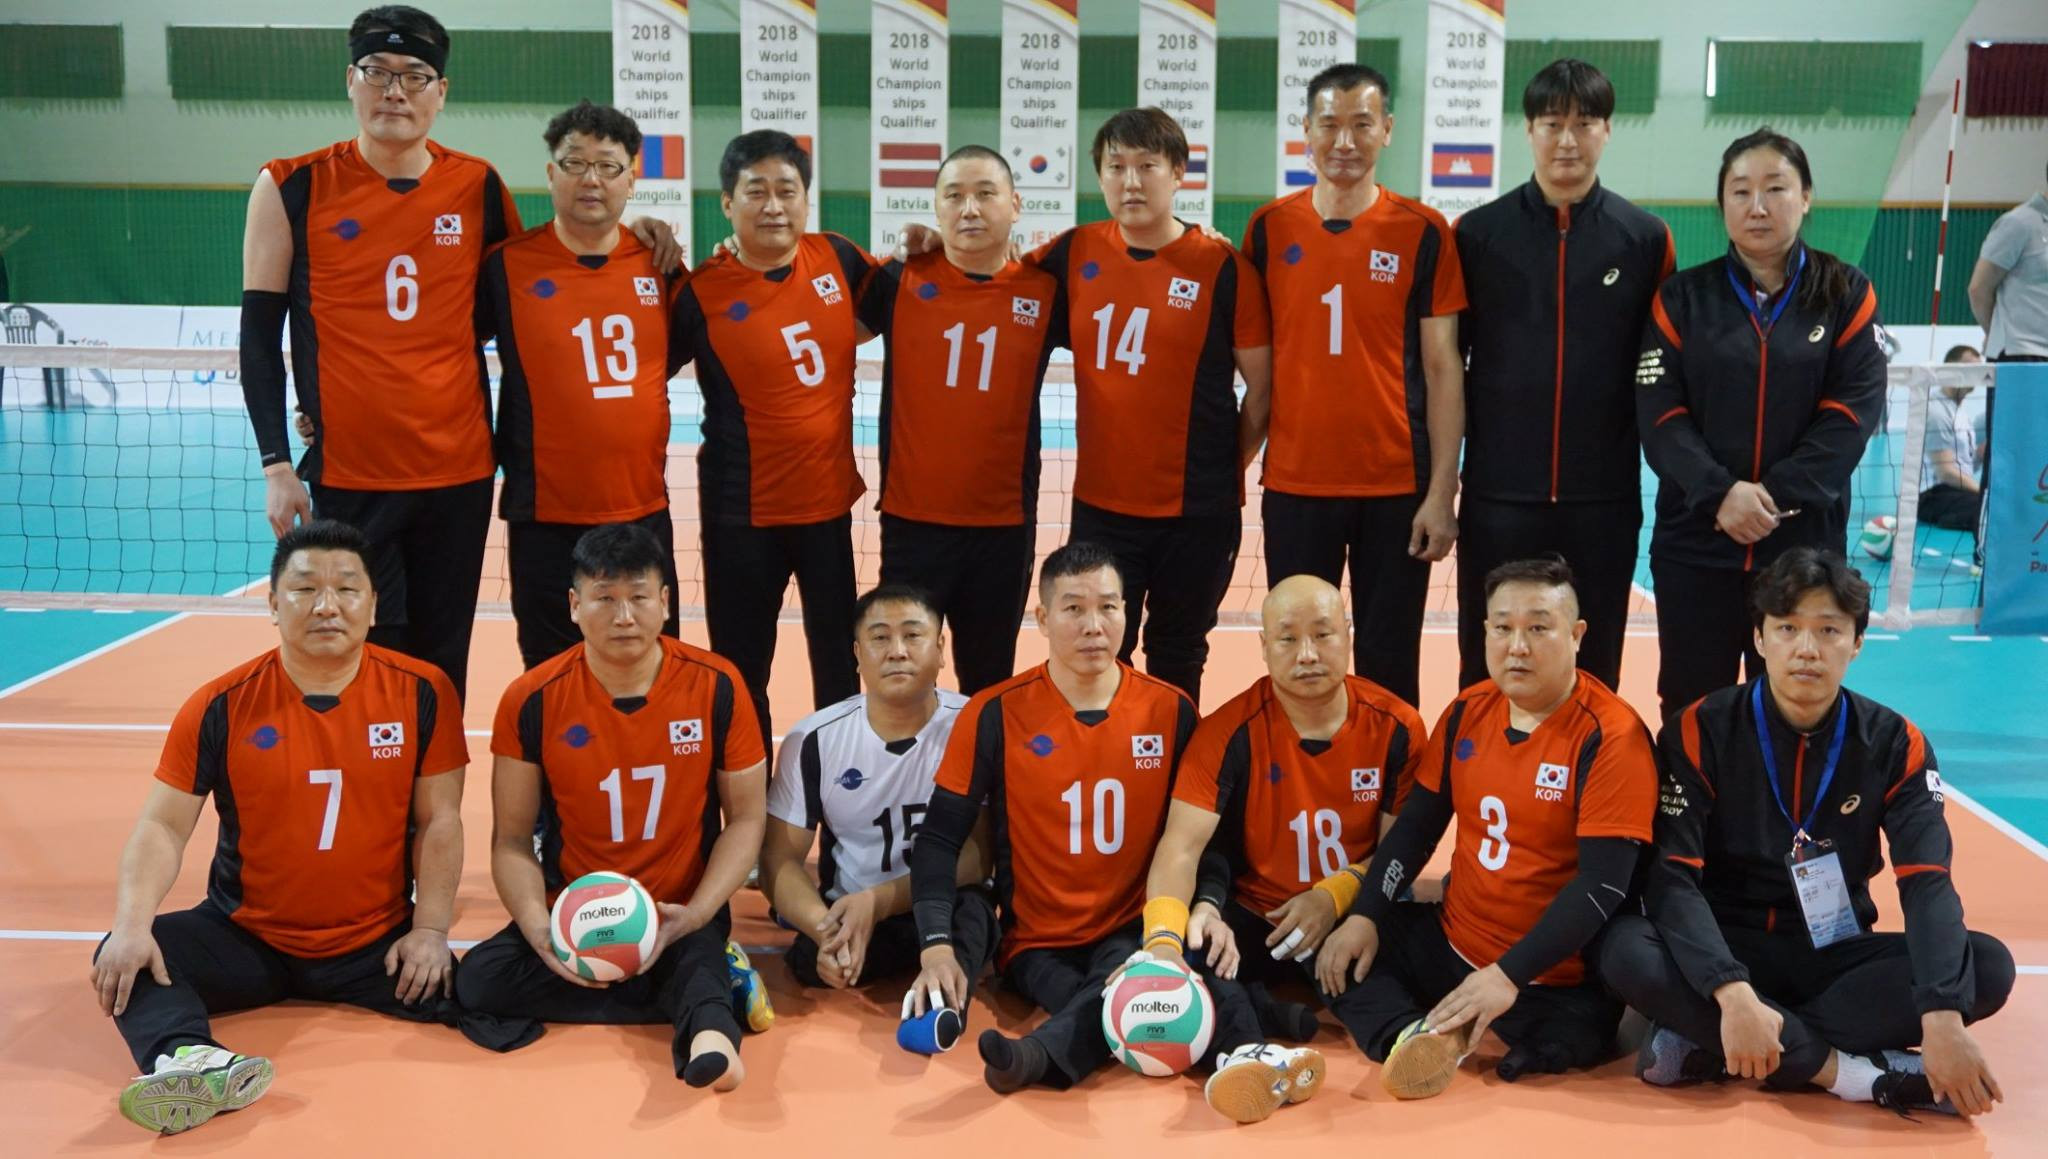 Hosts South Korea make strong start to final qualifier for 2018 Sitting Volleyball World Championships